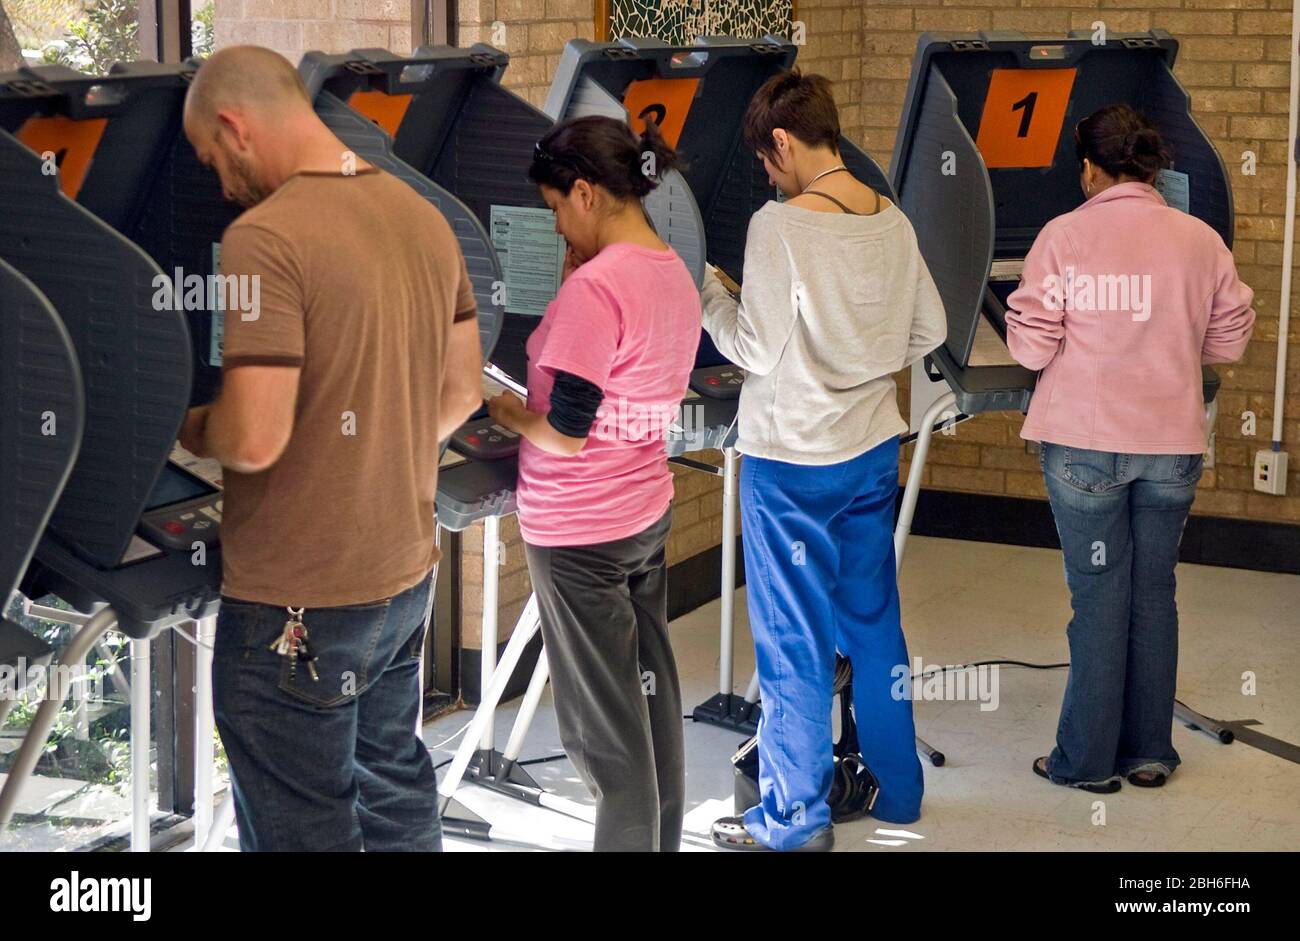 Austin, Texas USA, March 4, 2008: Voters cast ballots during the Texas primary election. ©Marjorie Kamys Cotera/Daemmrich Photography Stock Photo